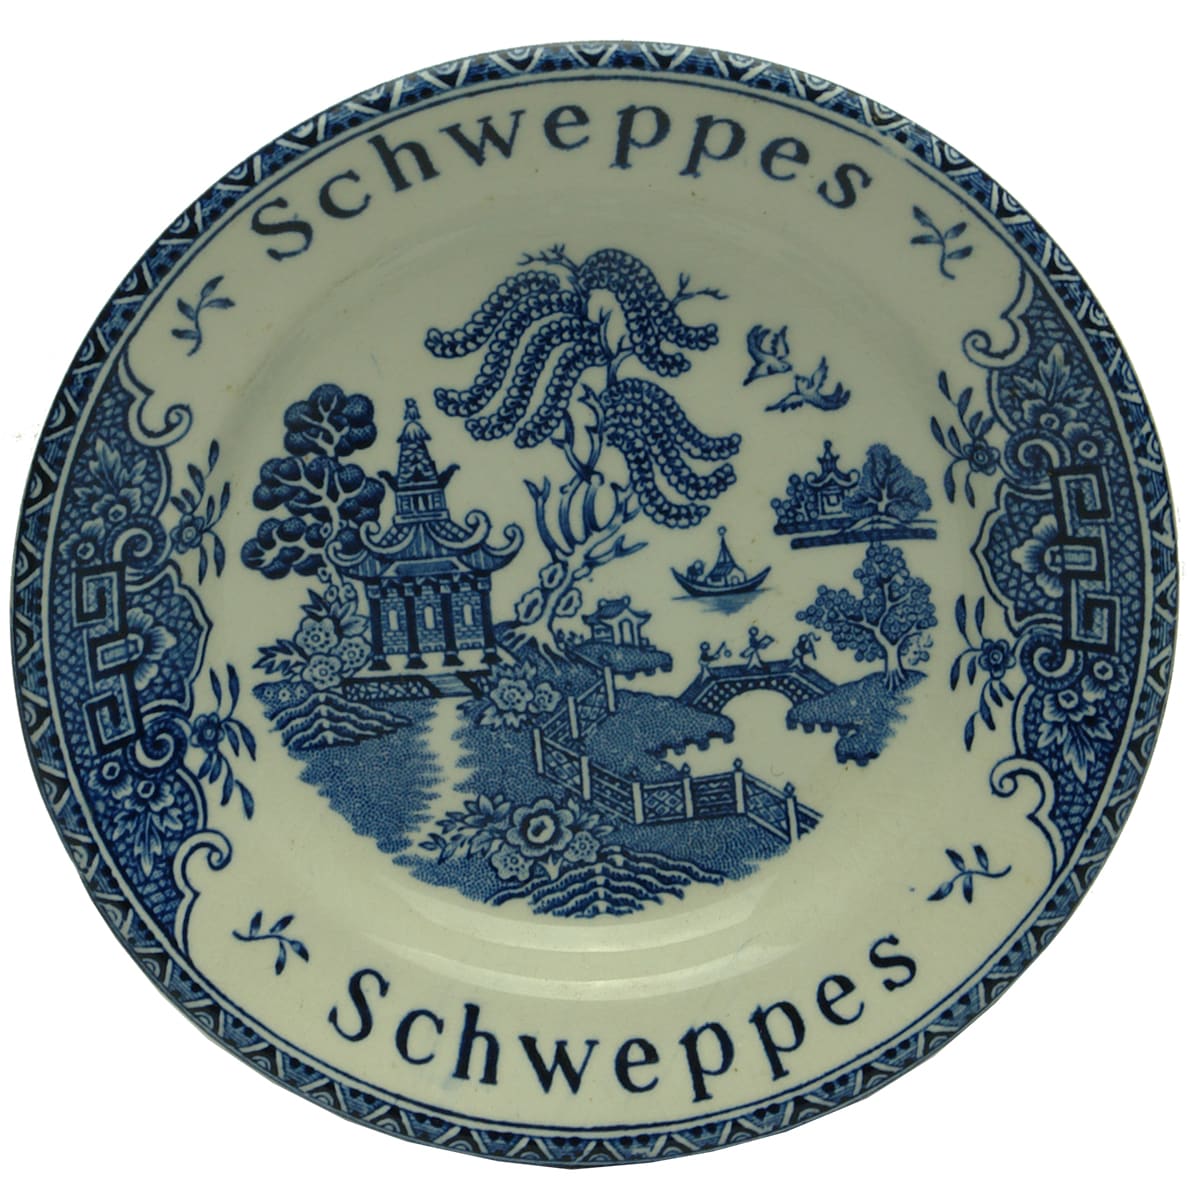 Change Tray. Schweppes. Willow Pattern. Blue.